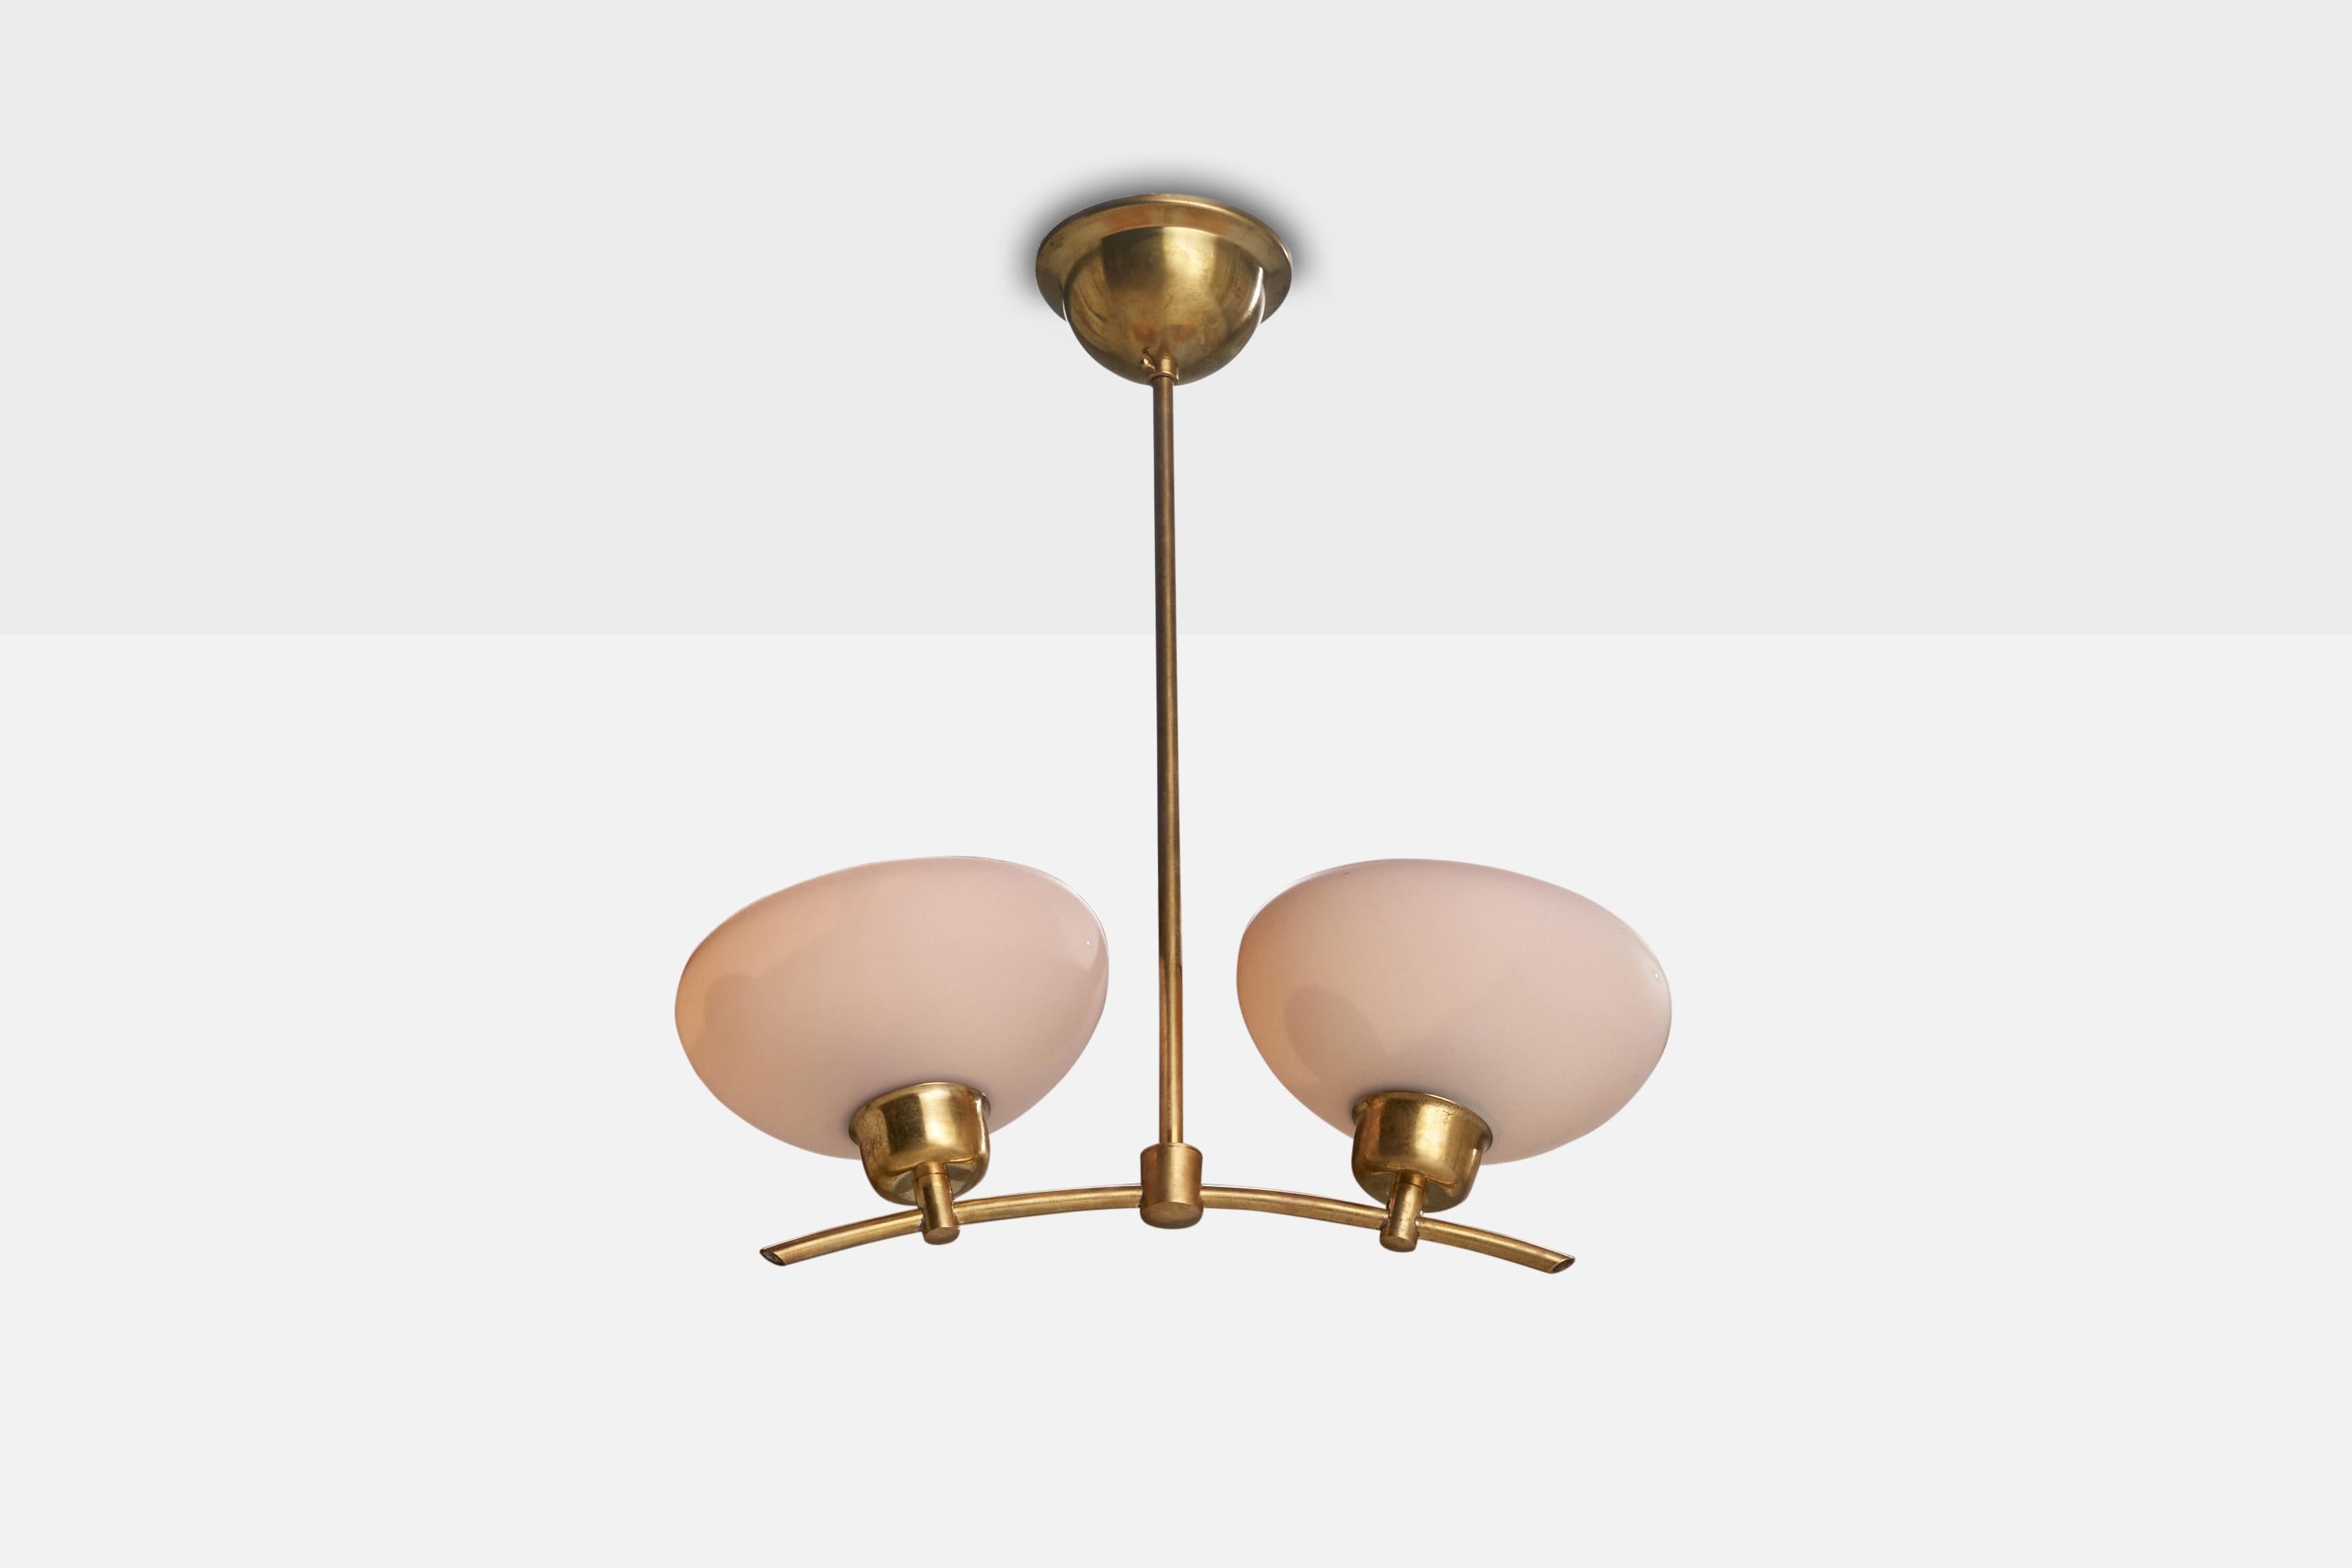 A brass and light pink glass chandelier designed and produced in Sweden, c. 1950s.

Dimensions of canopy (inches): 2.65” H x 4.31” Diameter
Socket takes standard E-26 bulbs. 2 socket.There is no maximum wattage stated on the fixture. All lighting